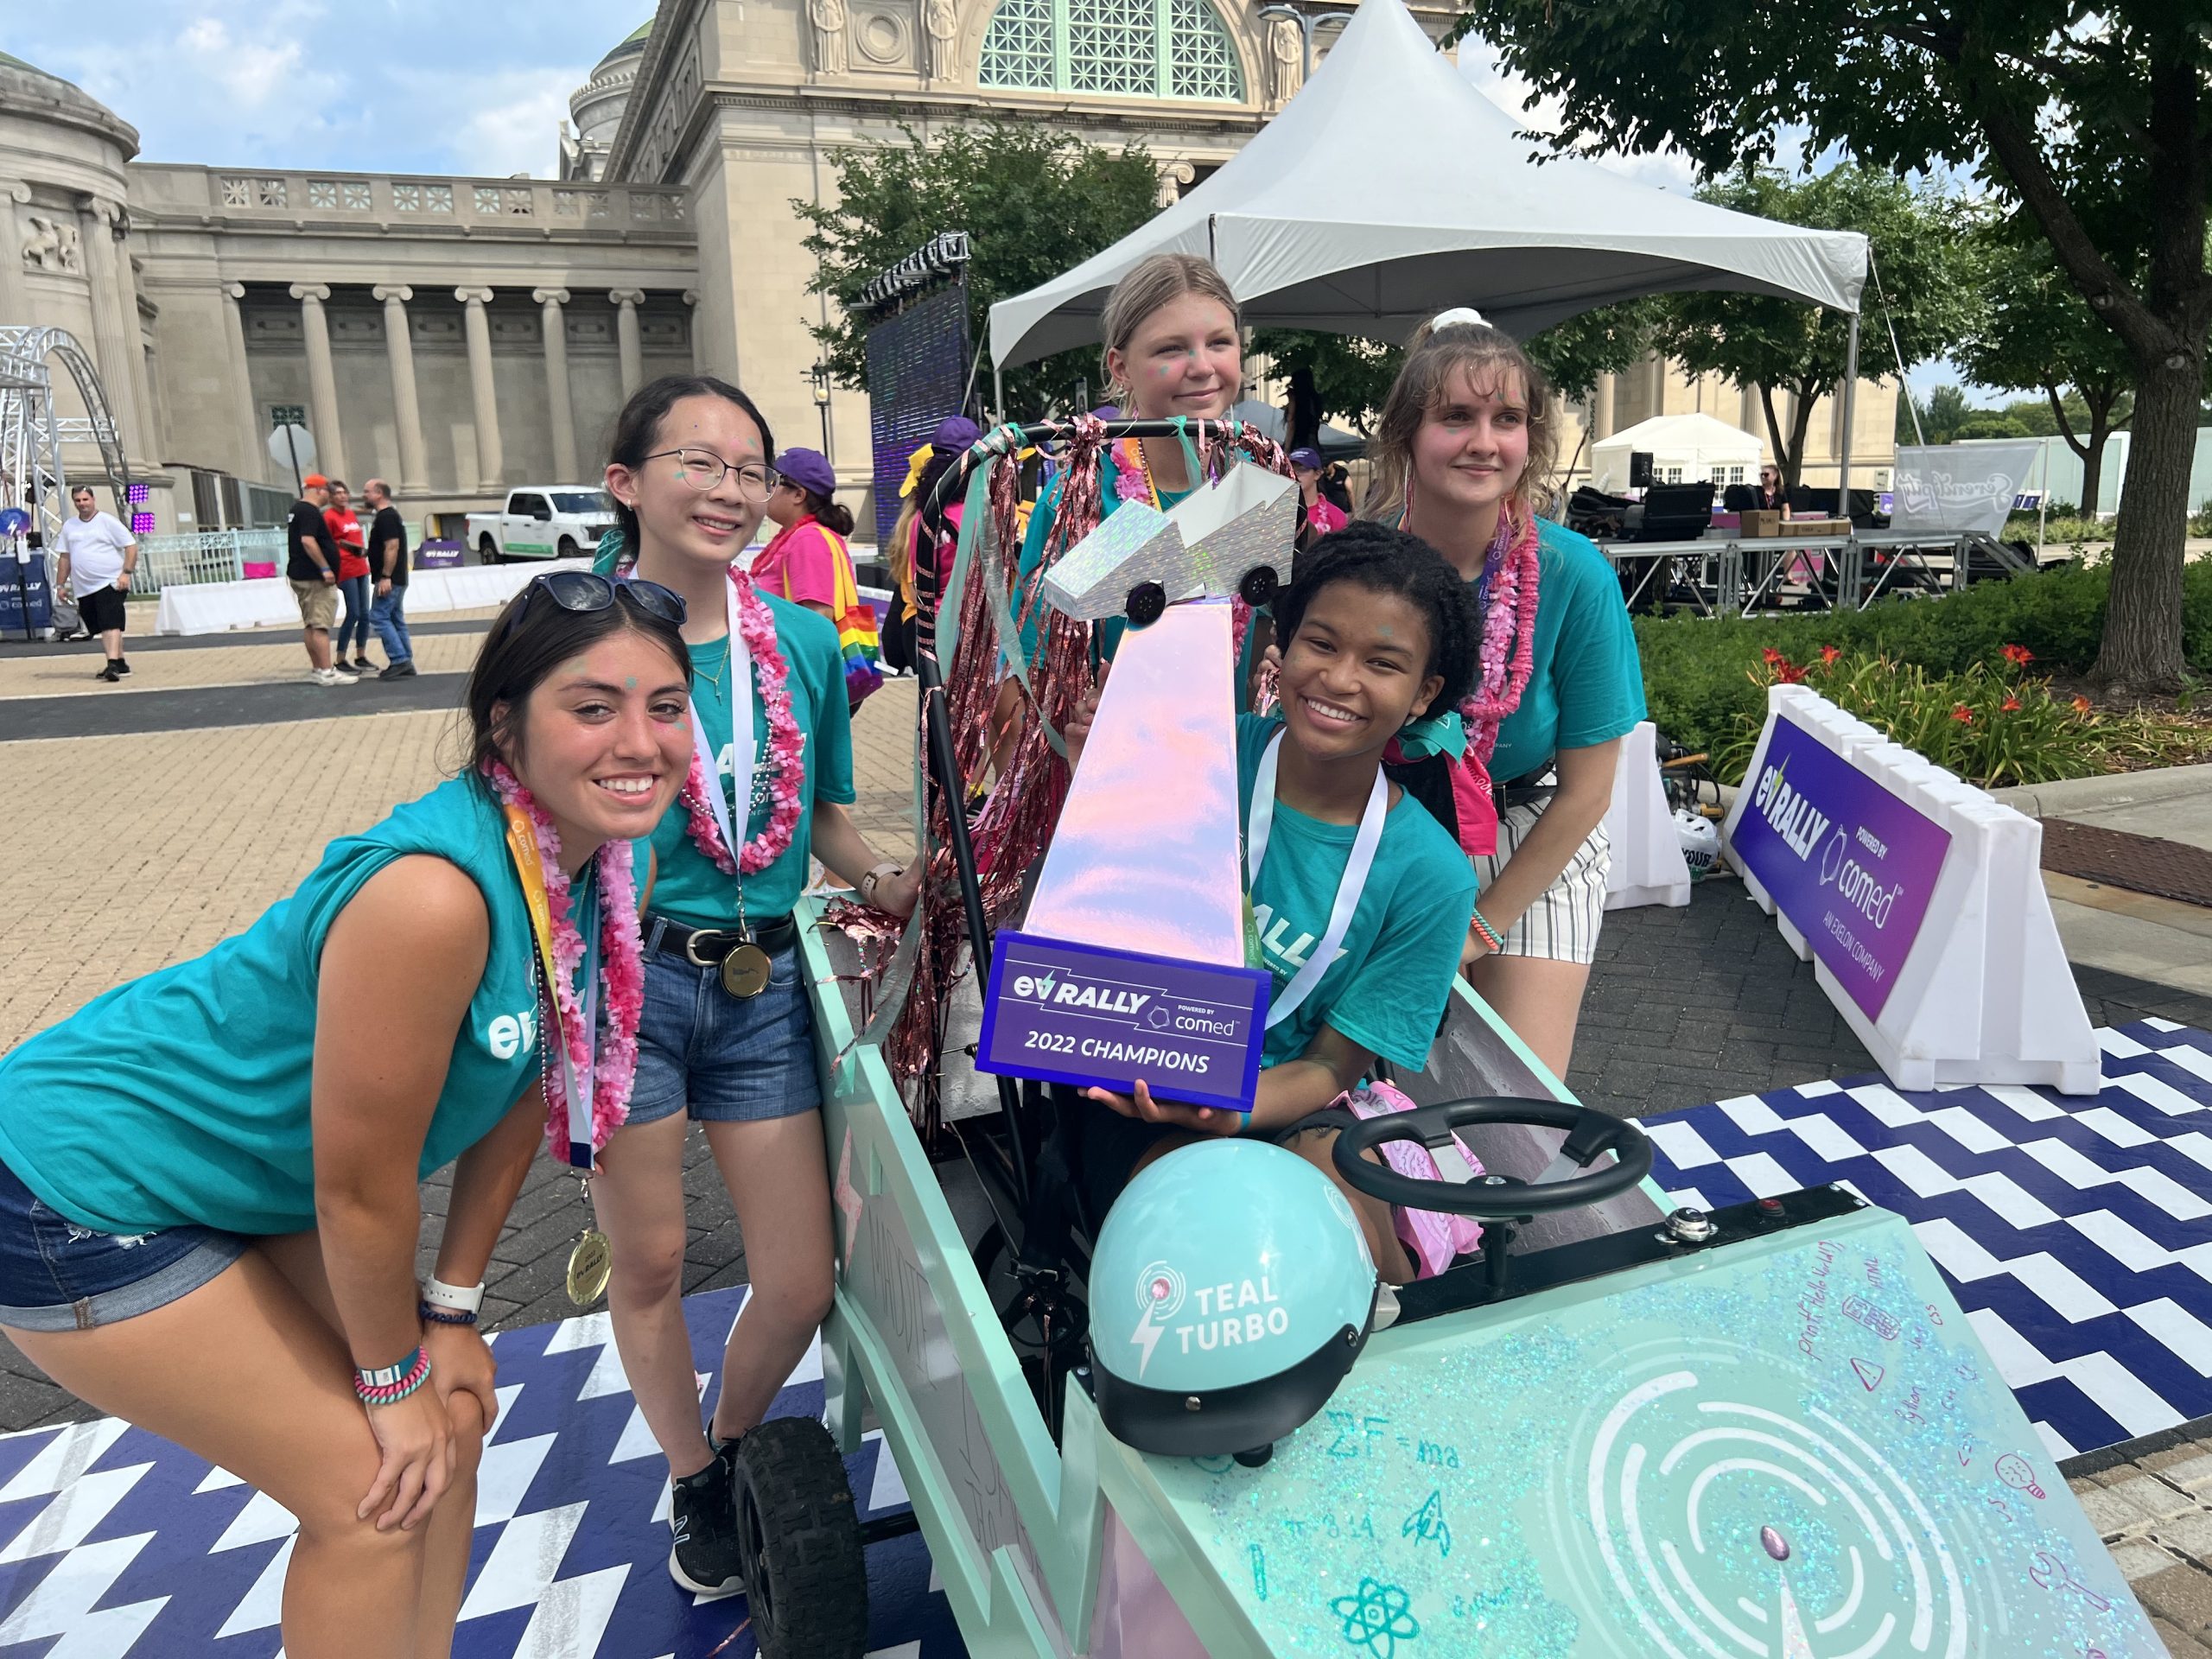 ComEd’s EV Rally inspiring one woman at a time in STEM Powering Lives